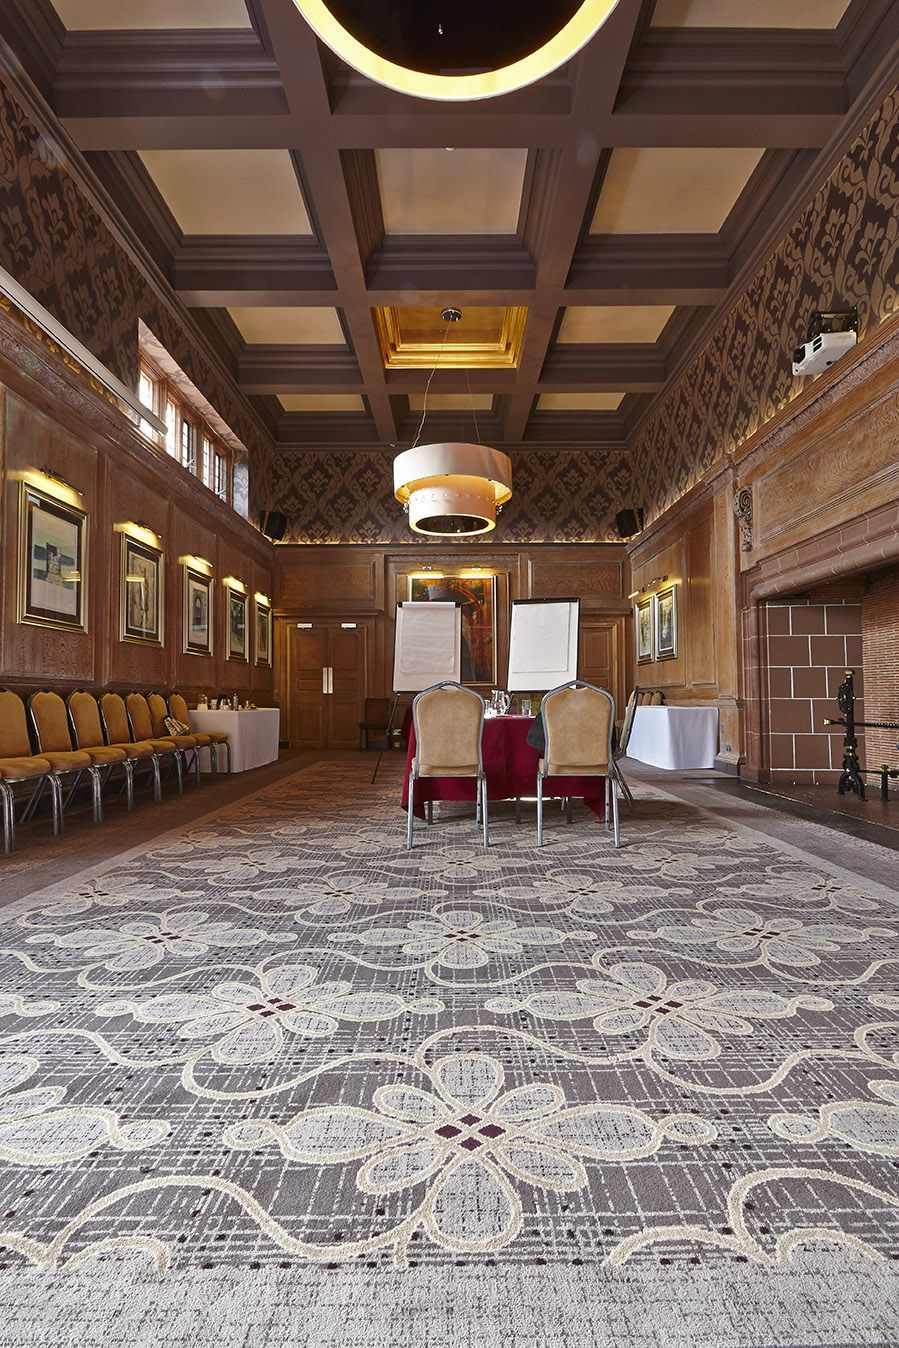 Abbey House Hotel bespoke meeting room carpet, with grey and cream strips, designed by Wilton Carpets